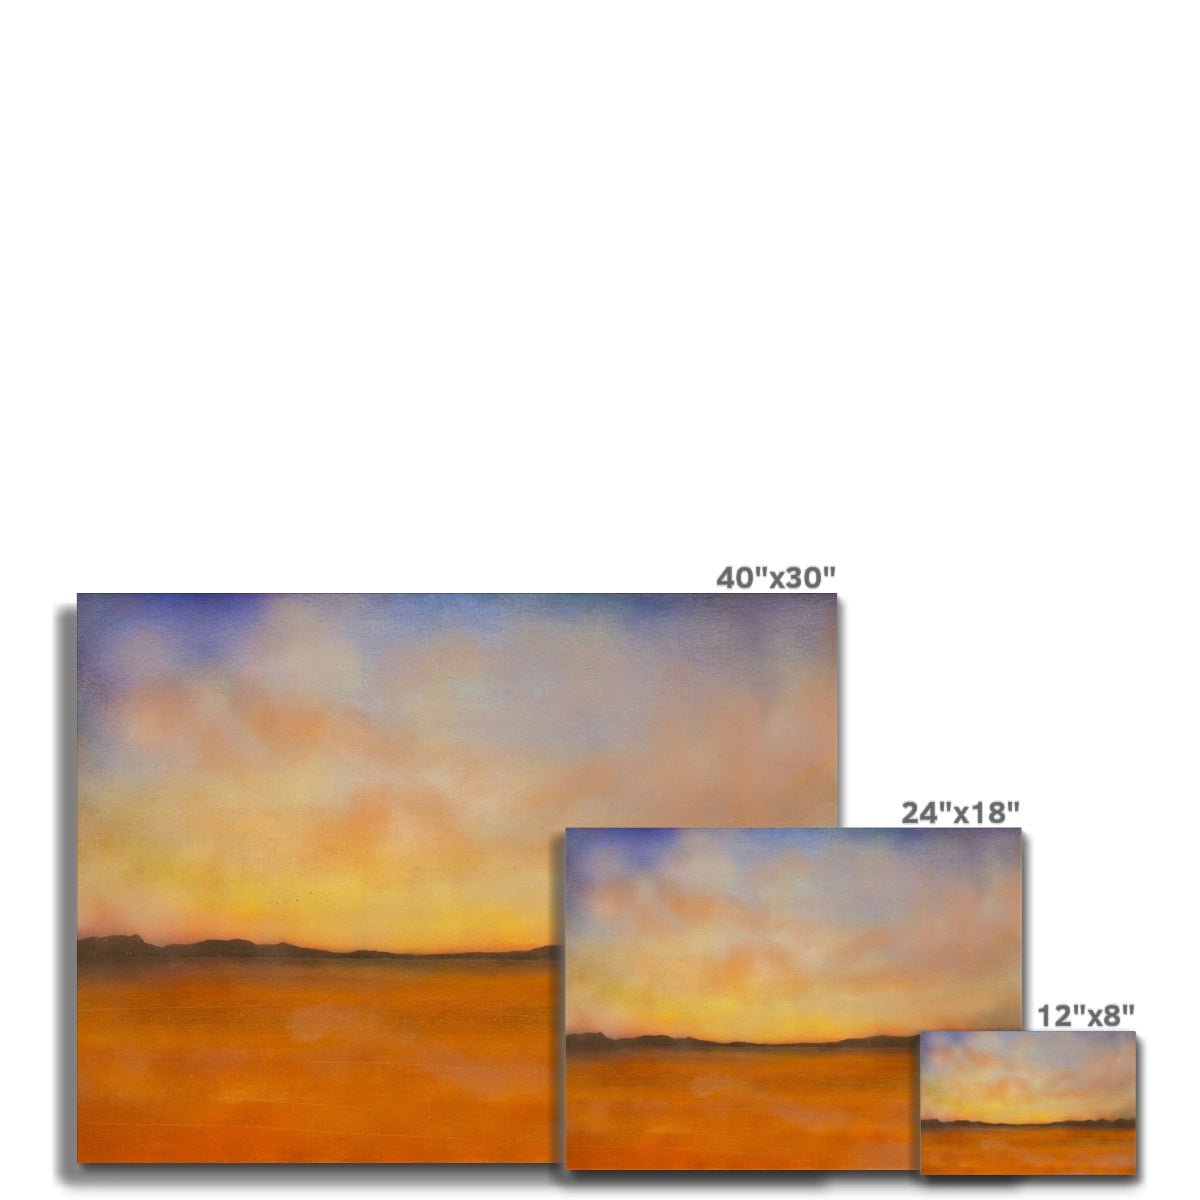 Islay Dawn Painting | Canvas From Scotland-Contemporary Stretched Canvas Prints-Hebridean Islands Art Gallery-Paintings, Prints, Homeware, Art Gifts From Scotland By Scottish Artist Kevin Hunter